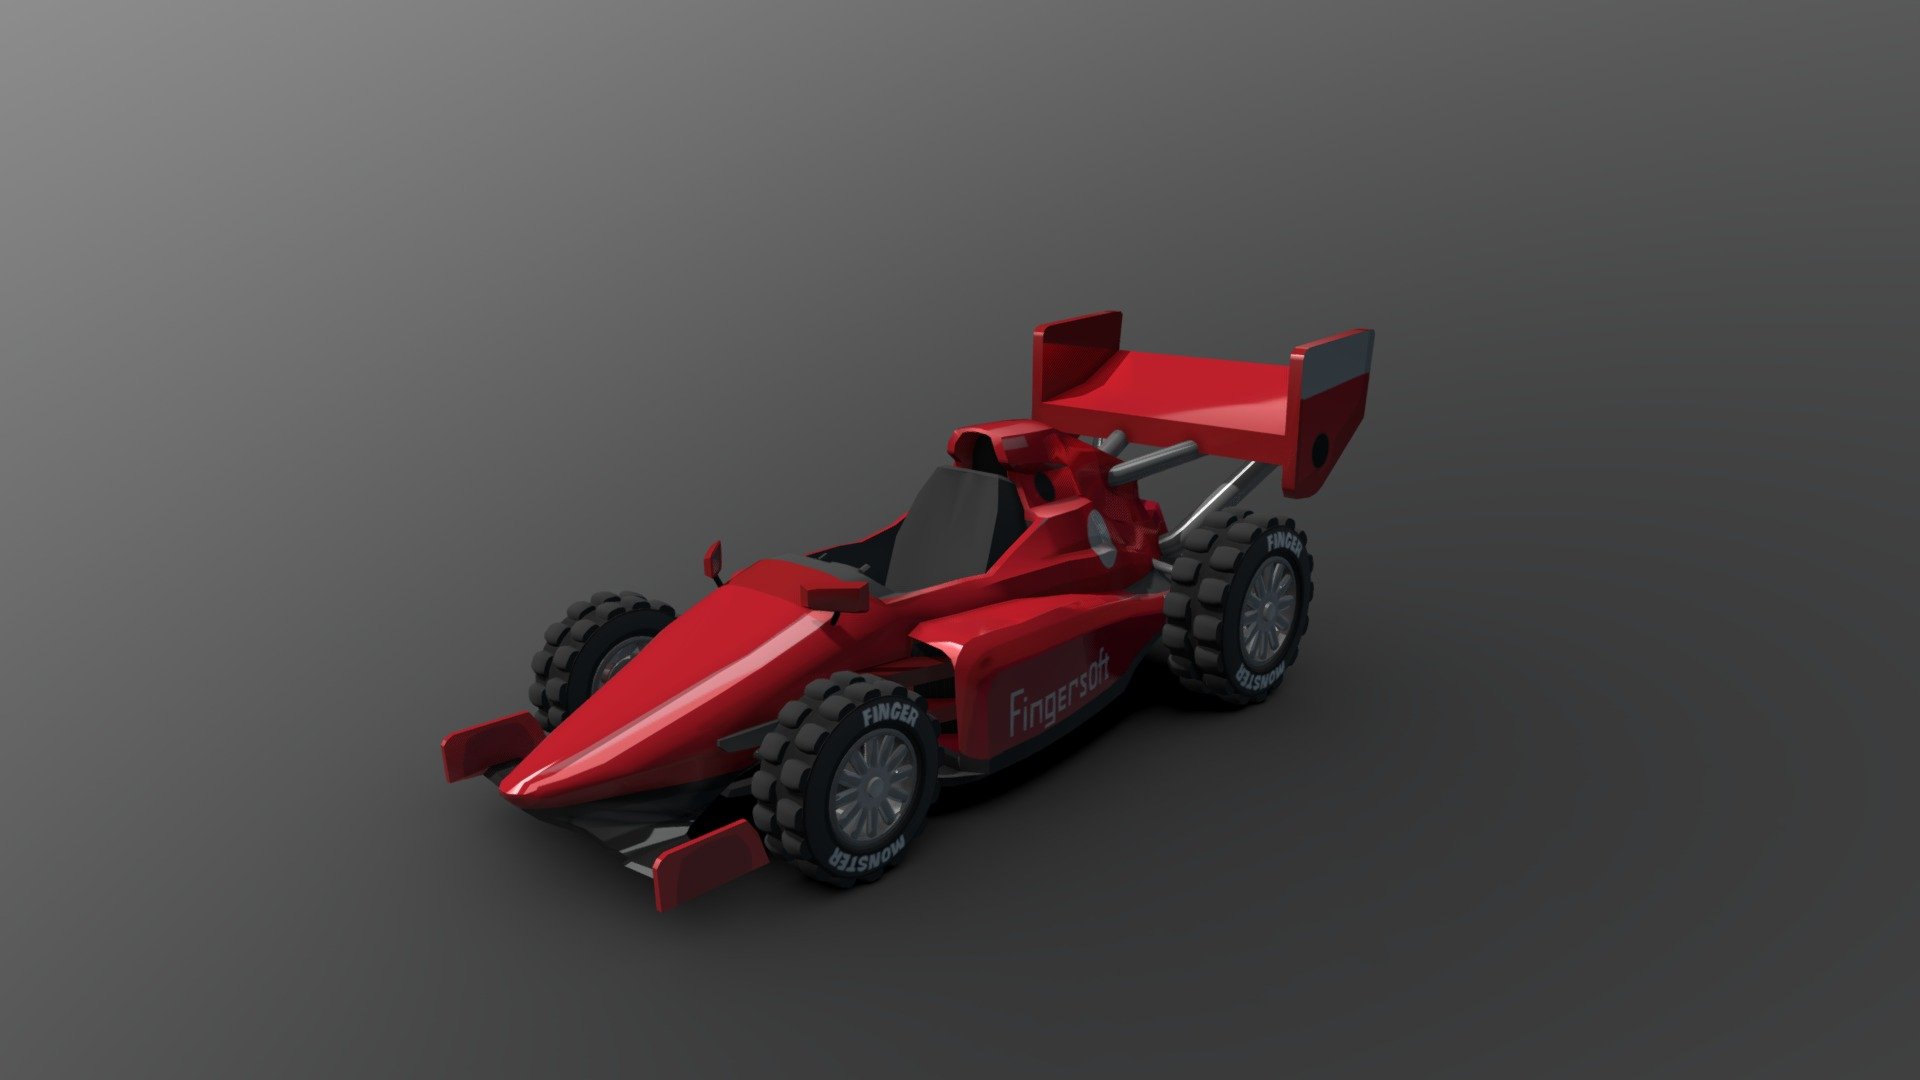 Race Car model based on Race car vehicle featured in Hill Climb Racing game by Fingersoft.

11 October 2020:Fixed wheels texture mirroring 3d model